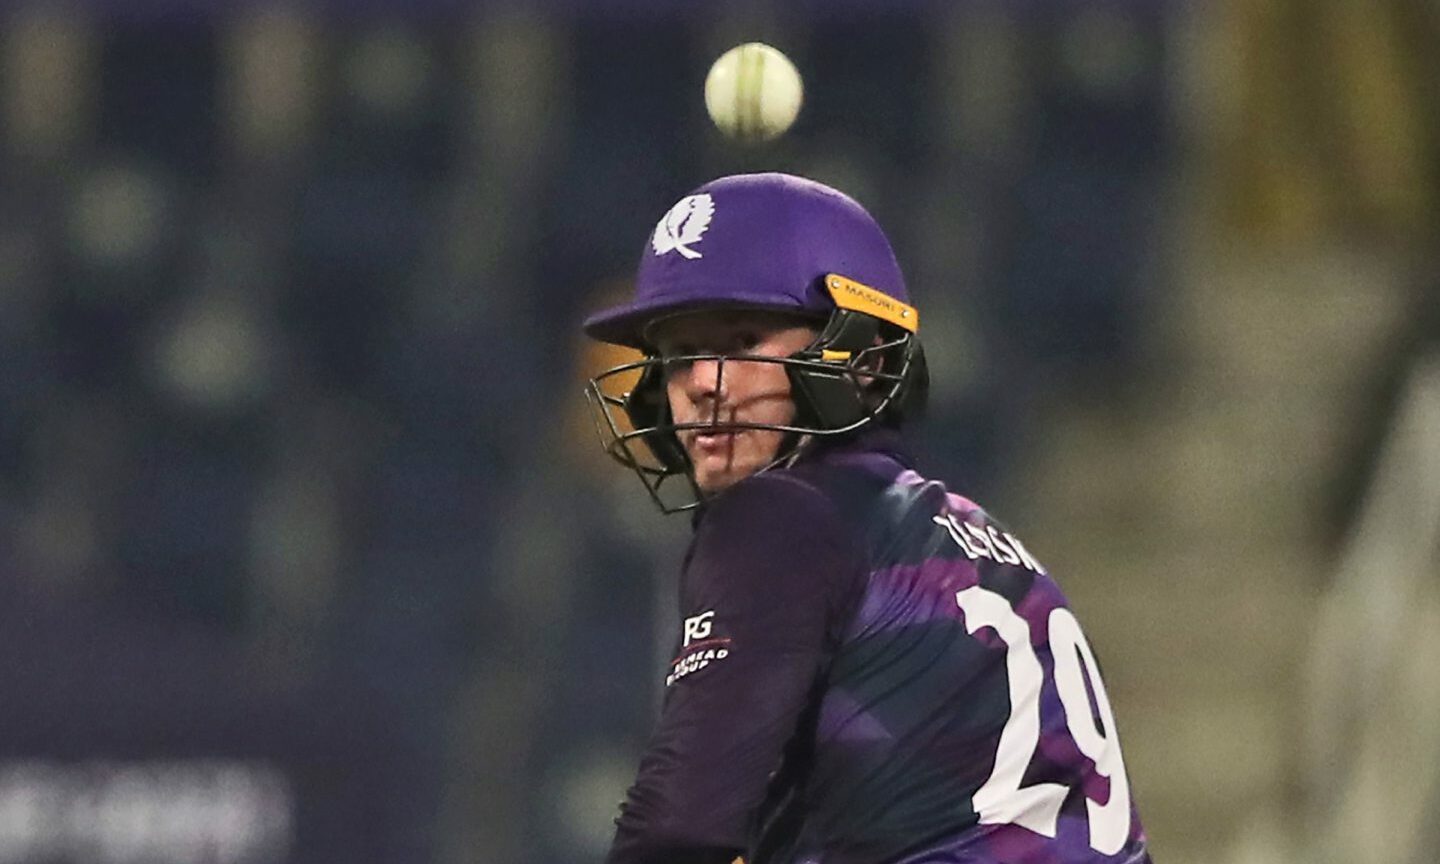 Scotland's Michael Leask bats during the Cricket Twenty20 World Cup match between Namibia and Scotland